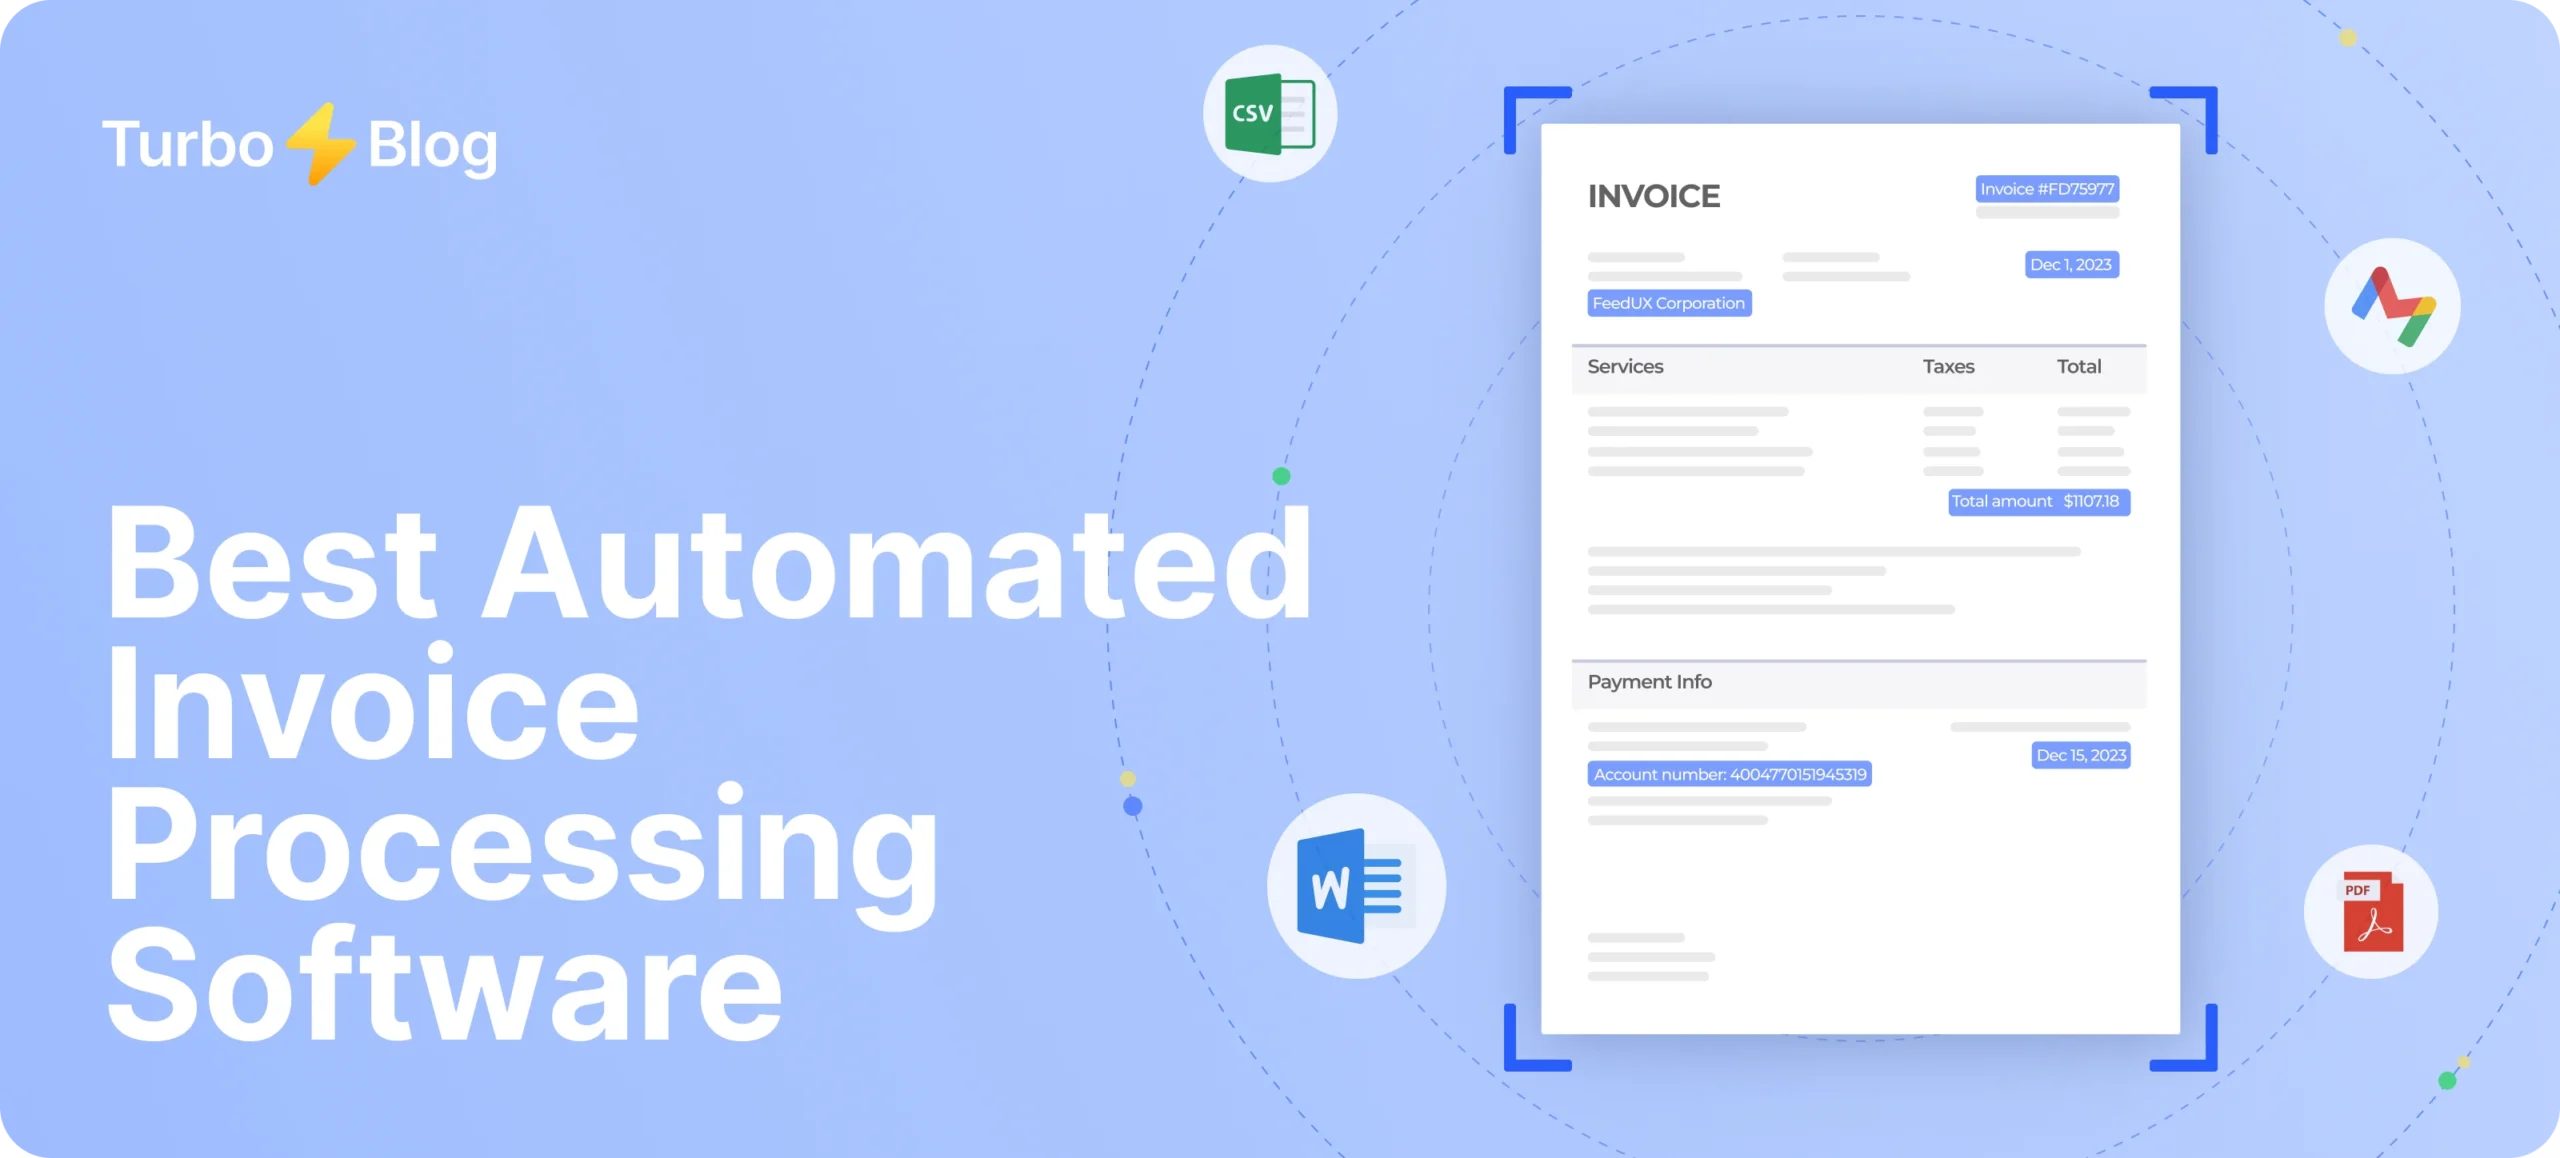 7 Best Automated Invoice Processing Software